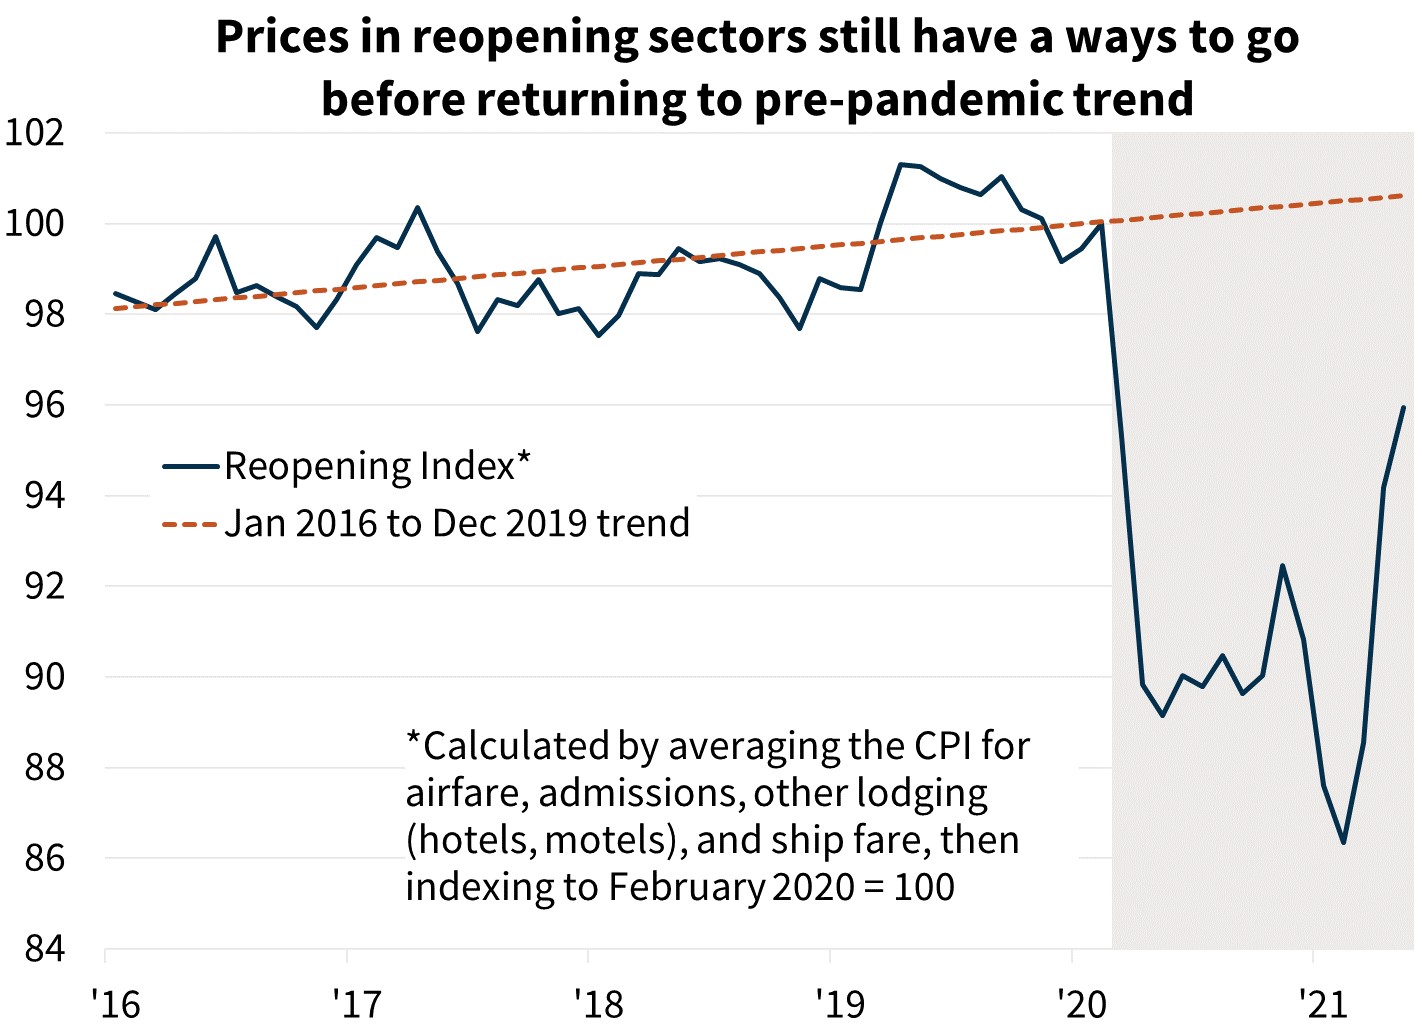  Prices in reopening sectors still have a ways to go before returning to pre-pandemic trends